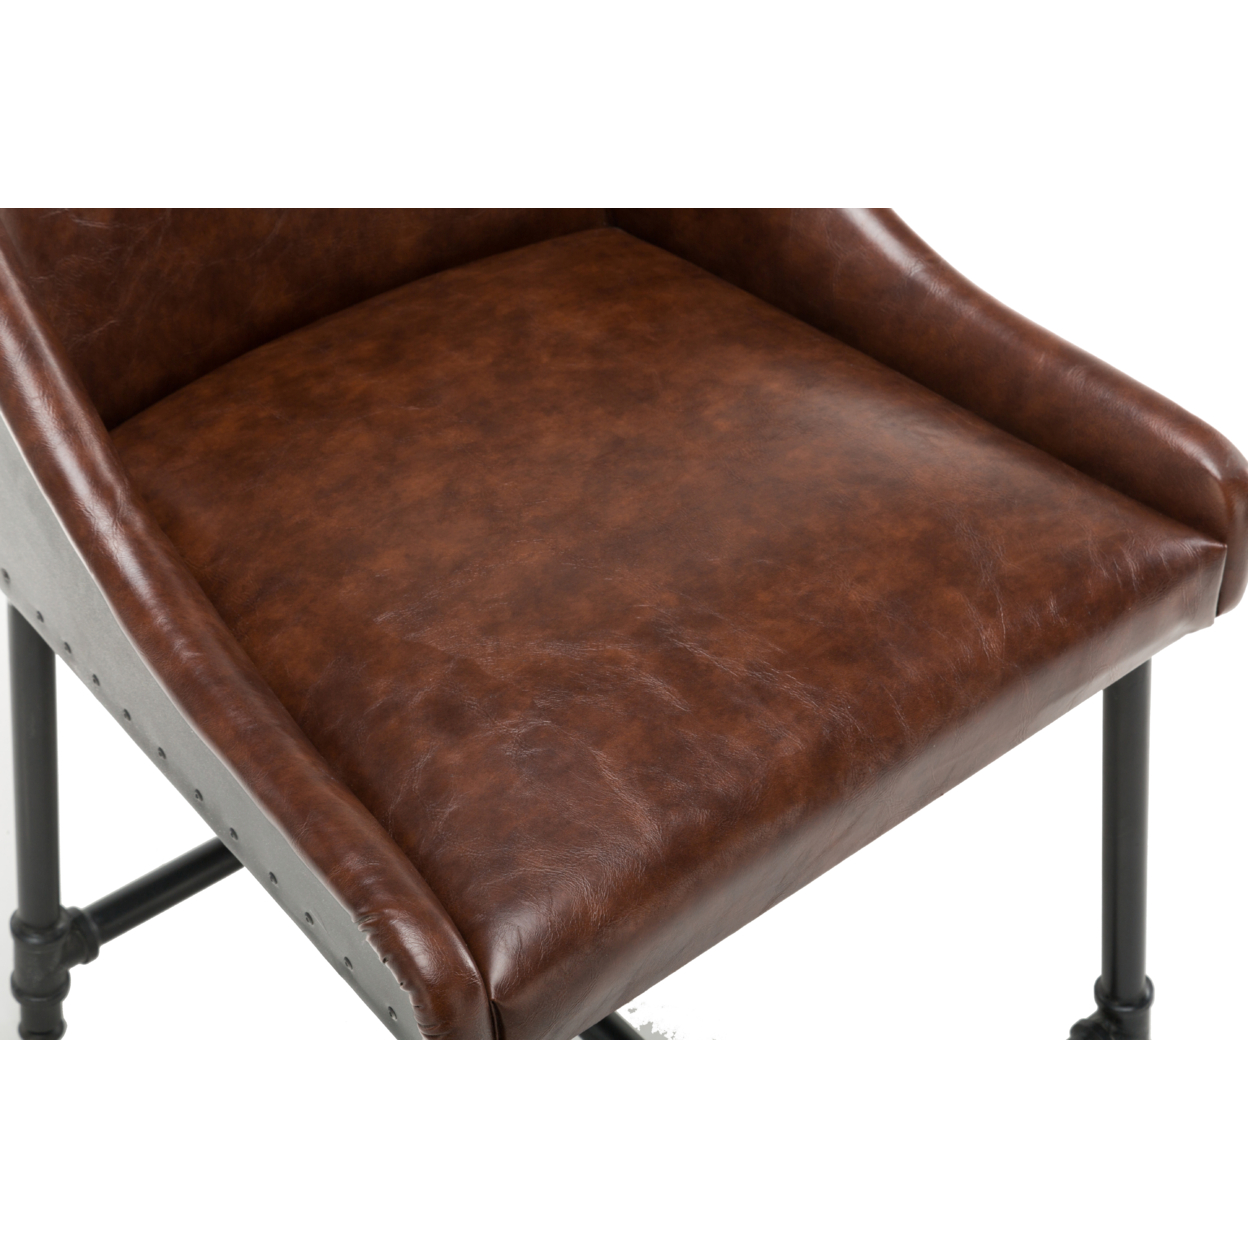 Leatherette Bar Stool With Riveted Metal Backing, Brown And Black- Saltoro Sherpi